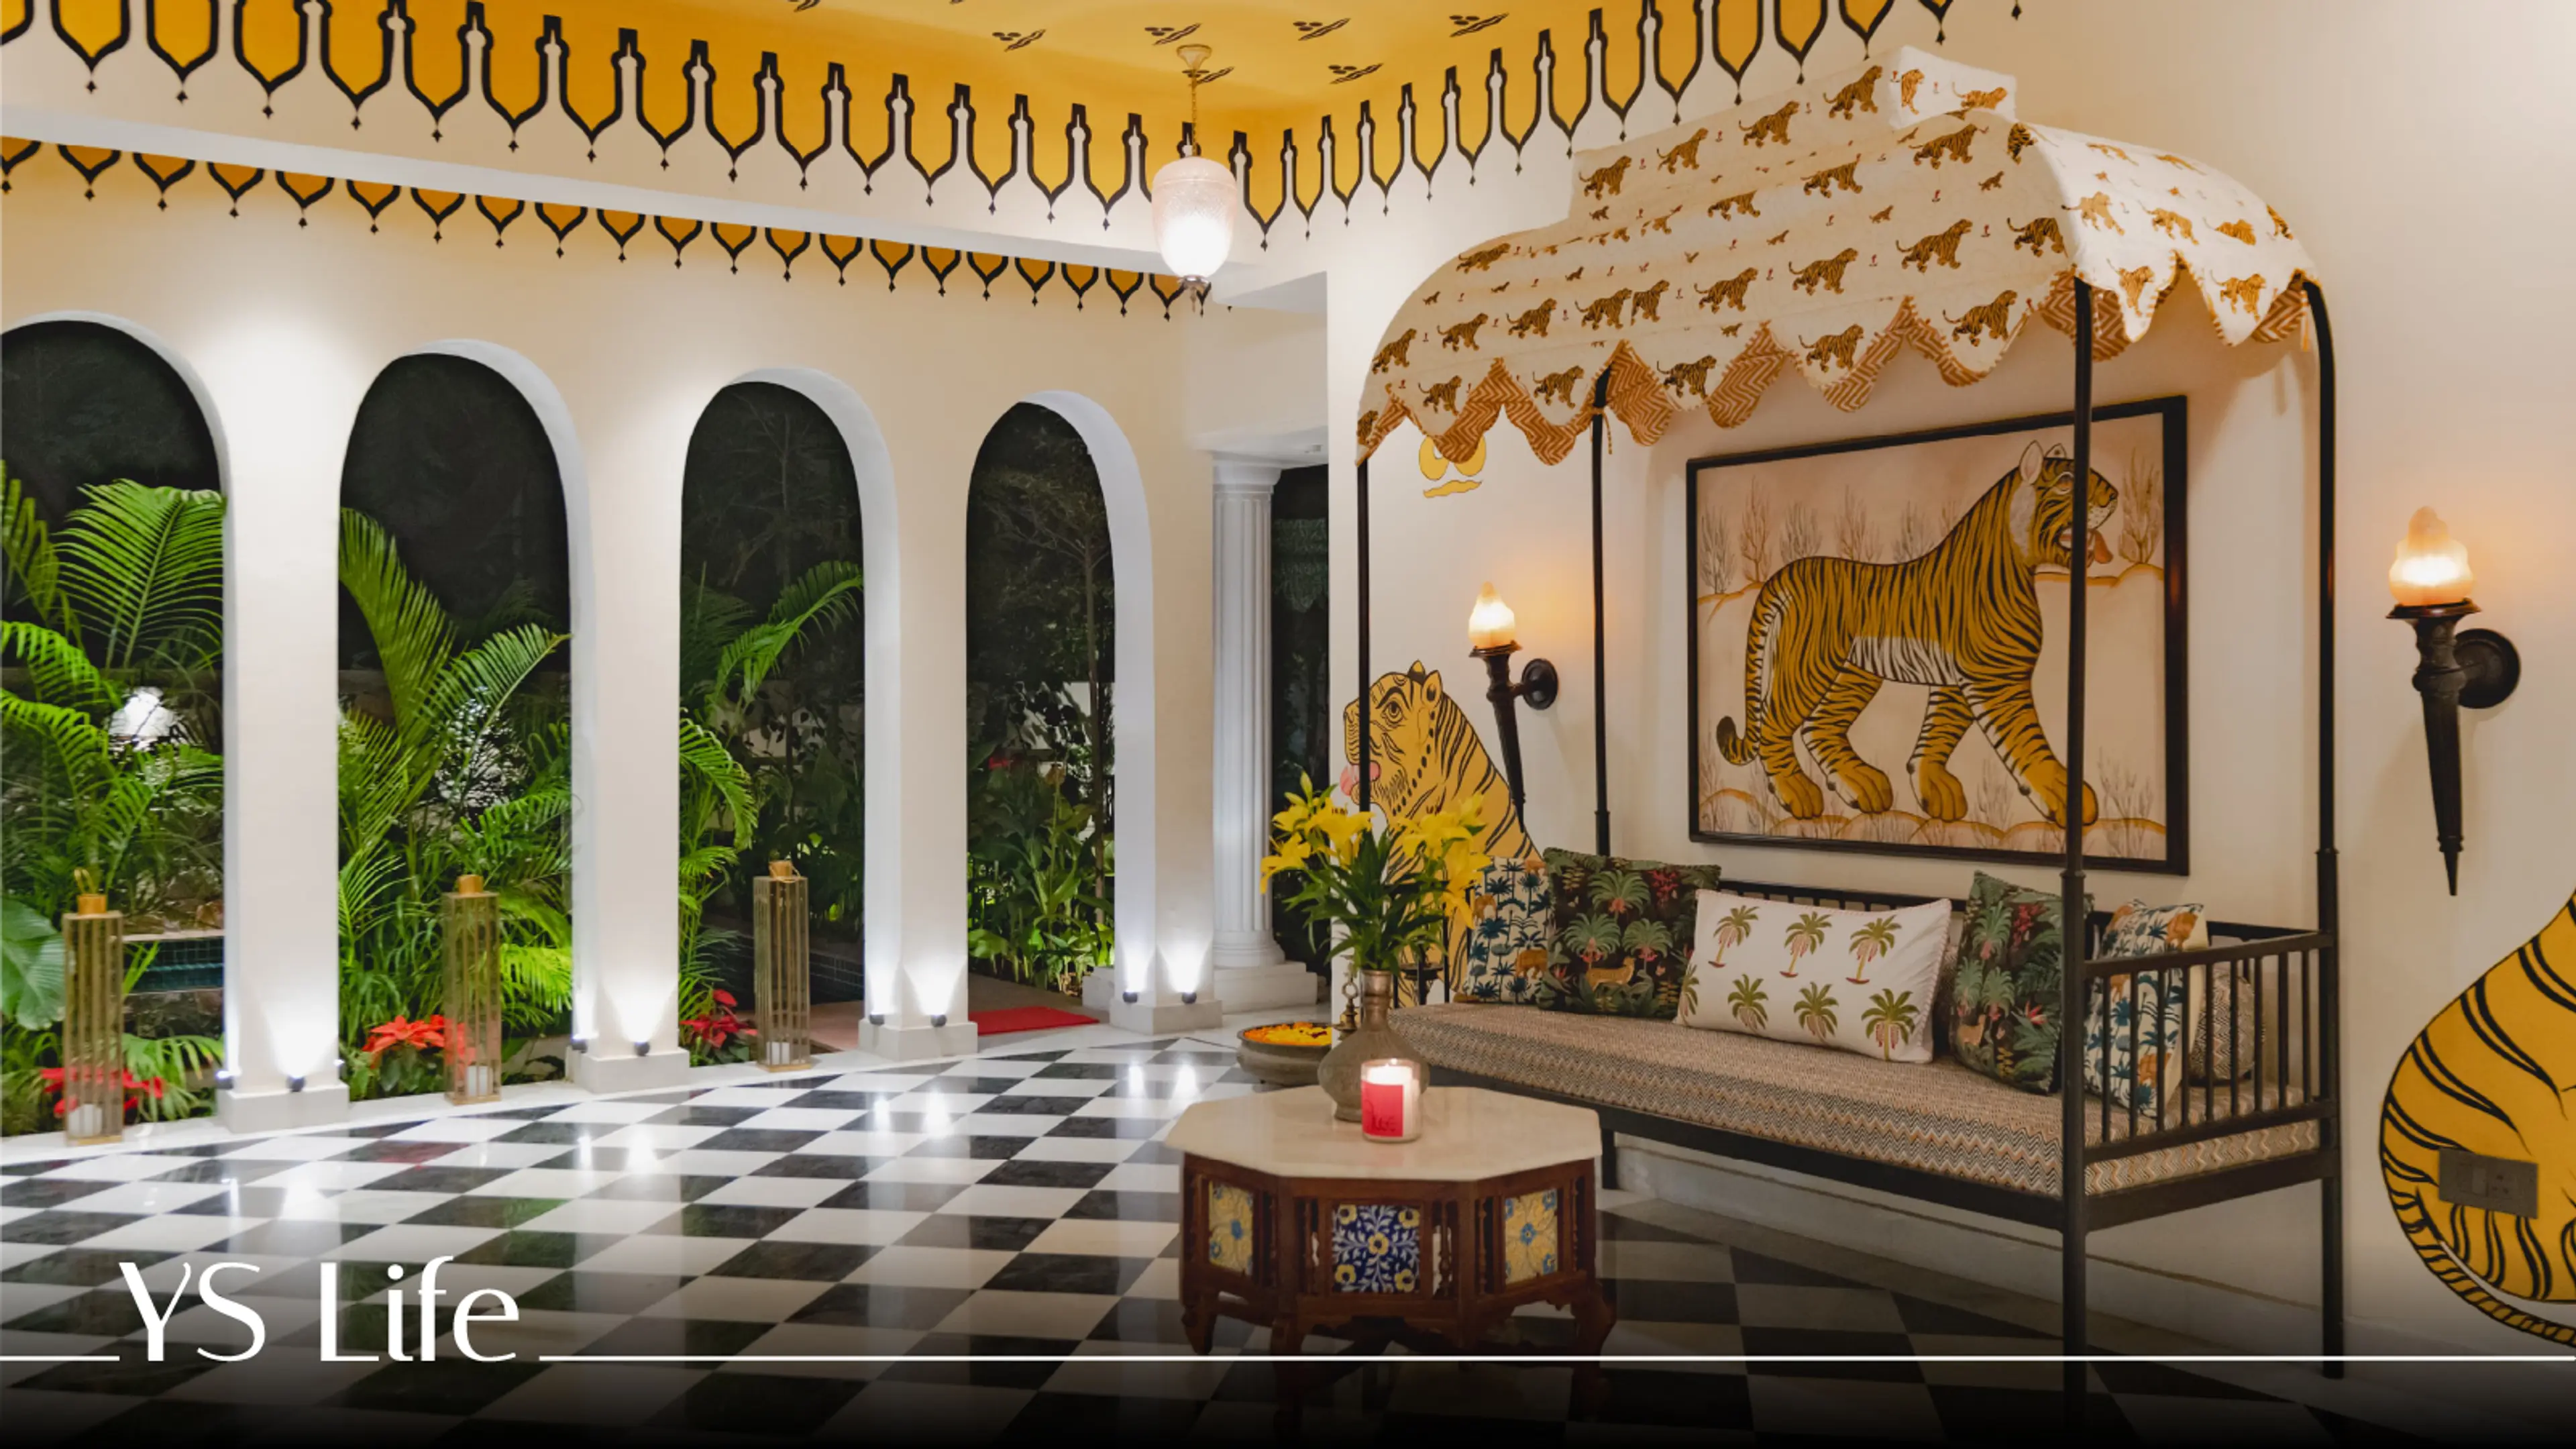 Laalee in Jaipur is a celebration of local culture, cuisine and Krishna